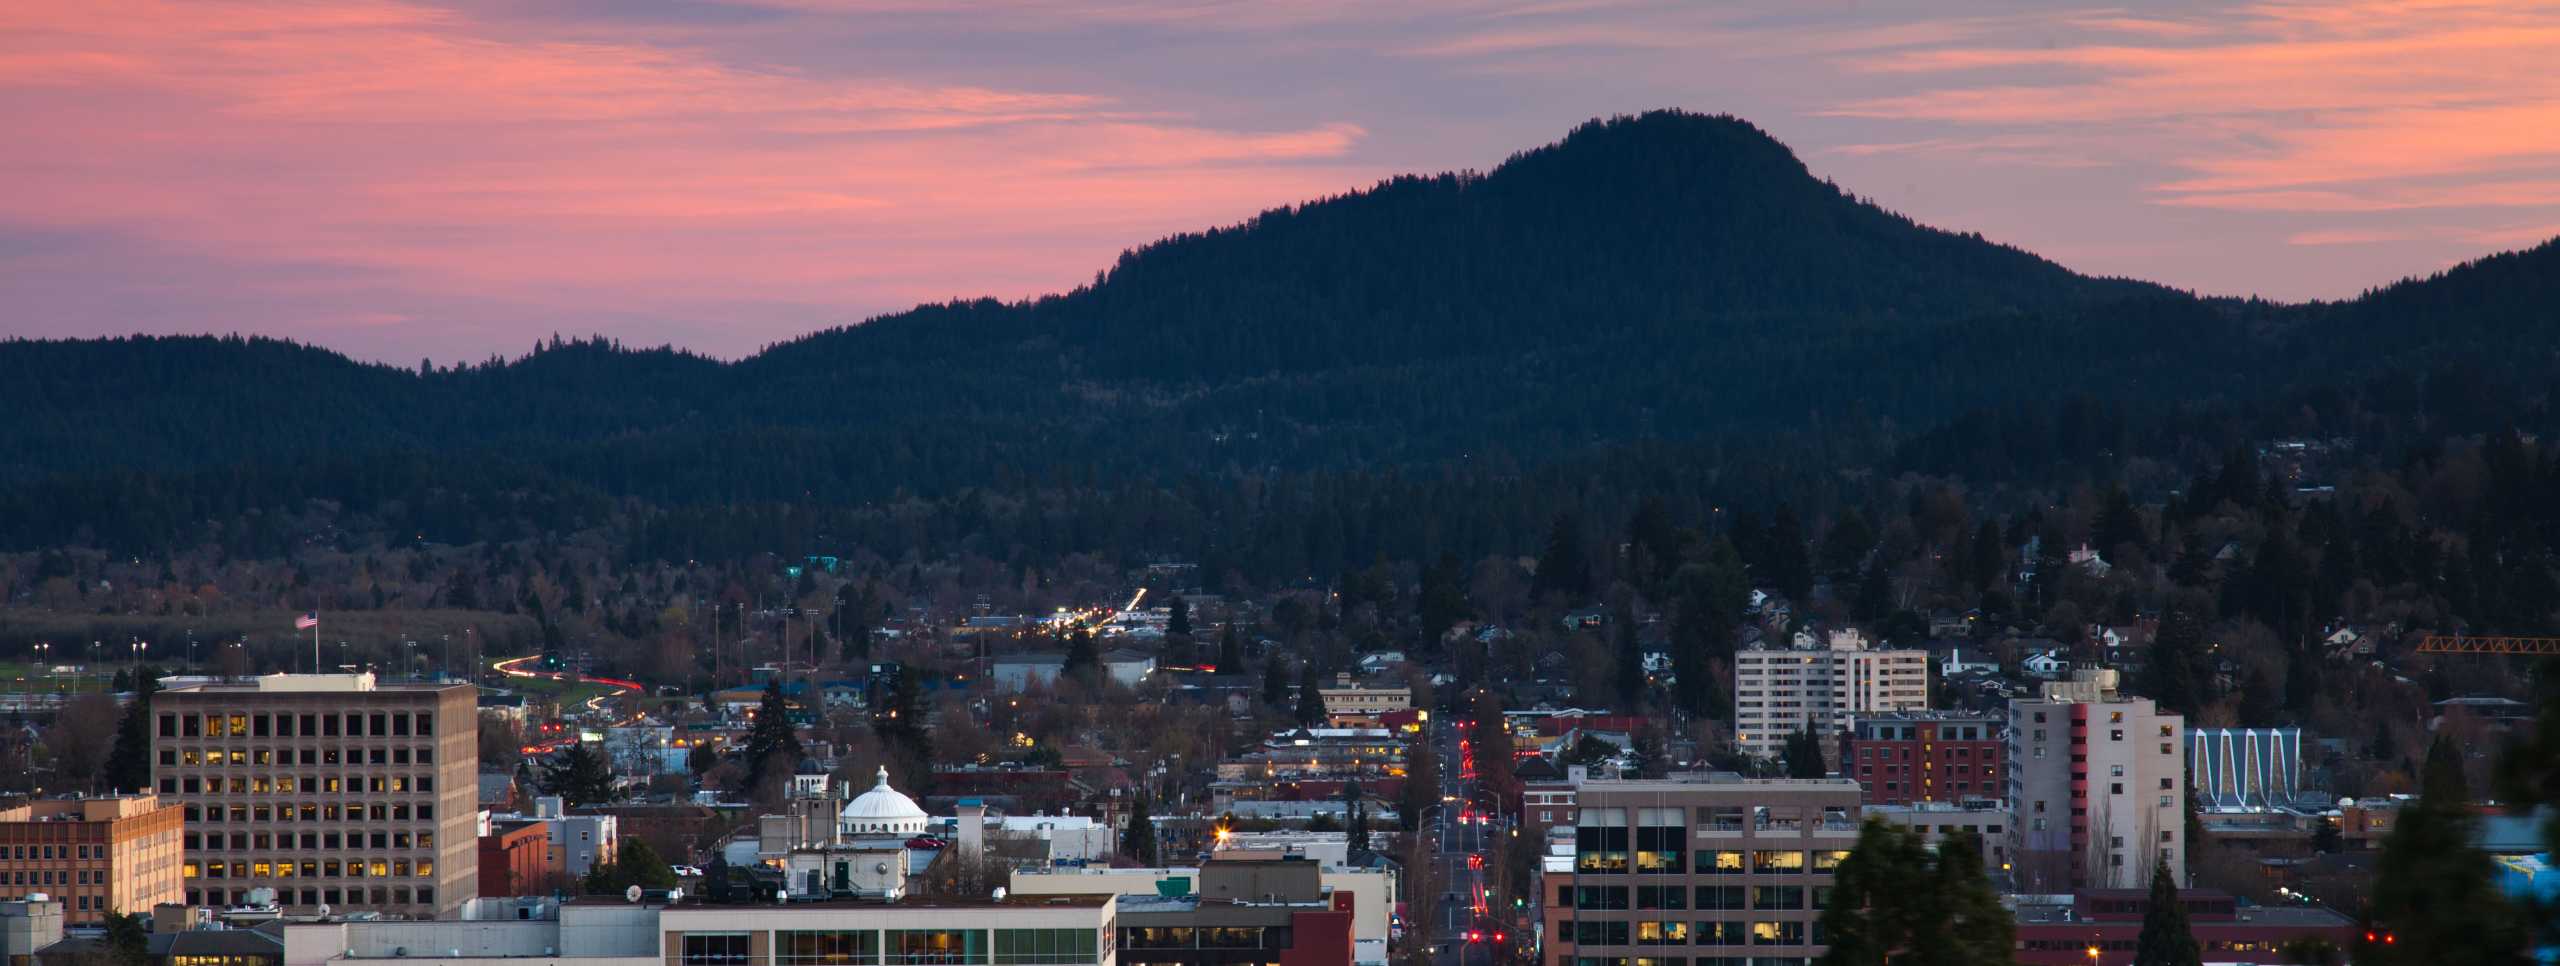 Downtown View of Eugene at dusk